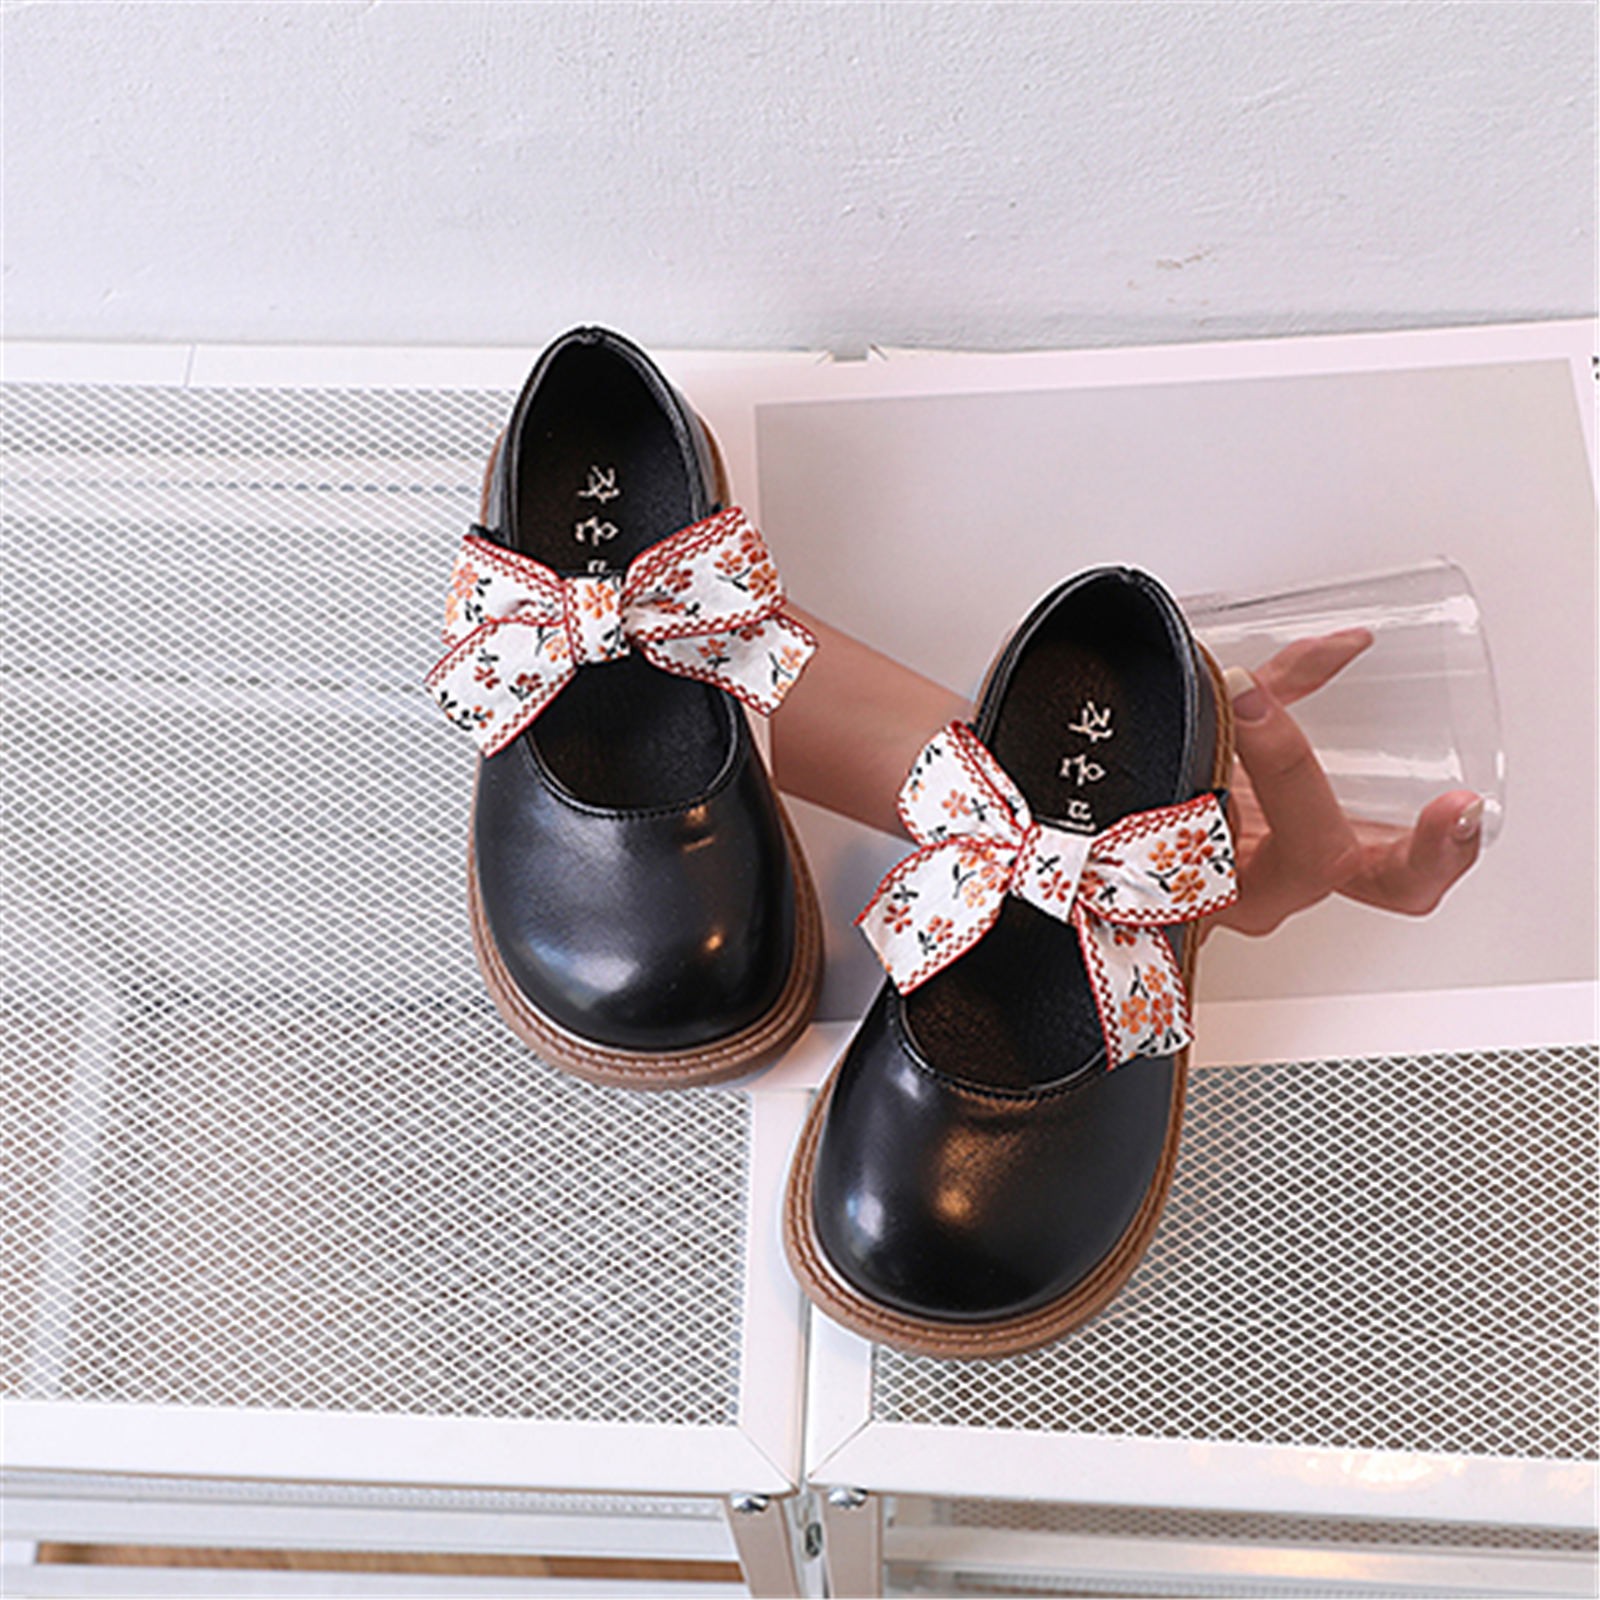 Girls Sandals Dress Shoes Cute Bow Shoes Satin Ankle Tie Flower For ...